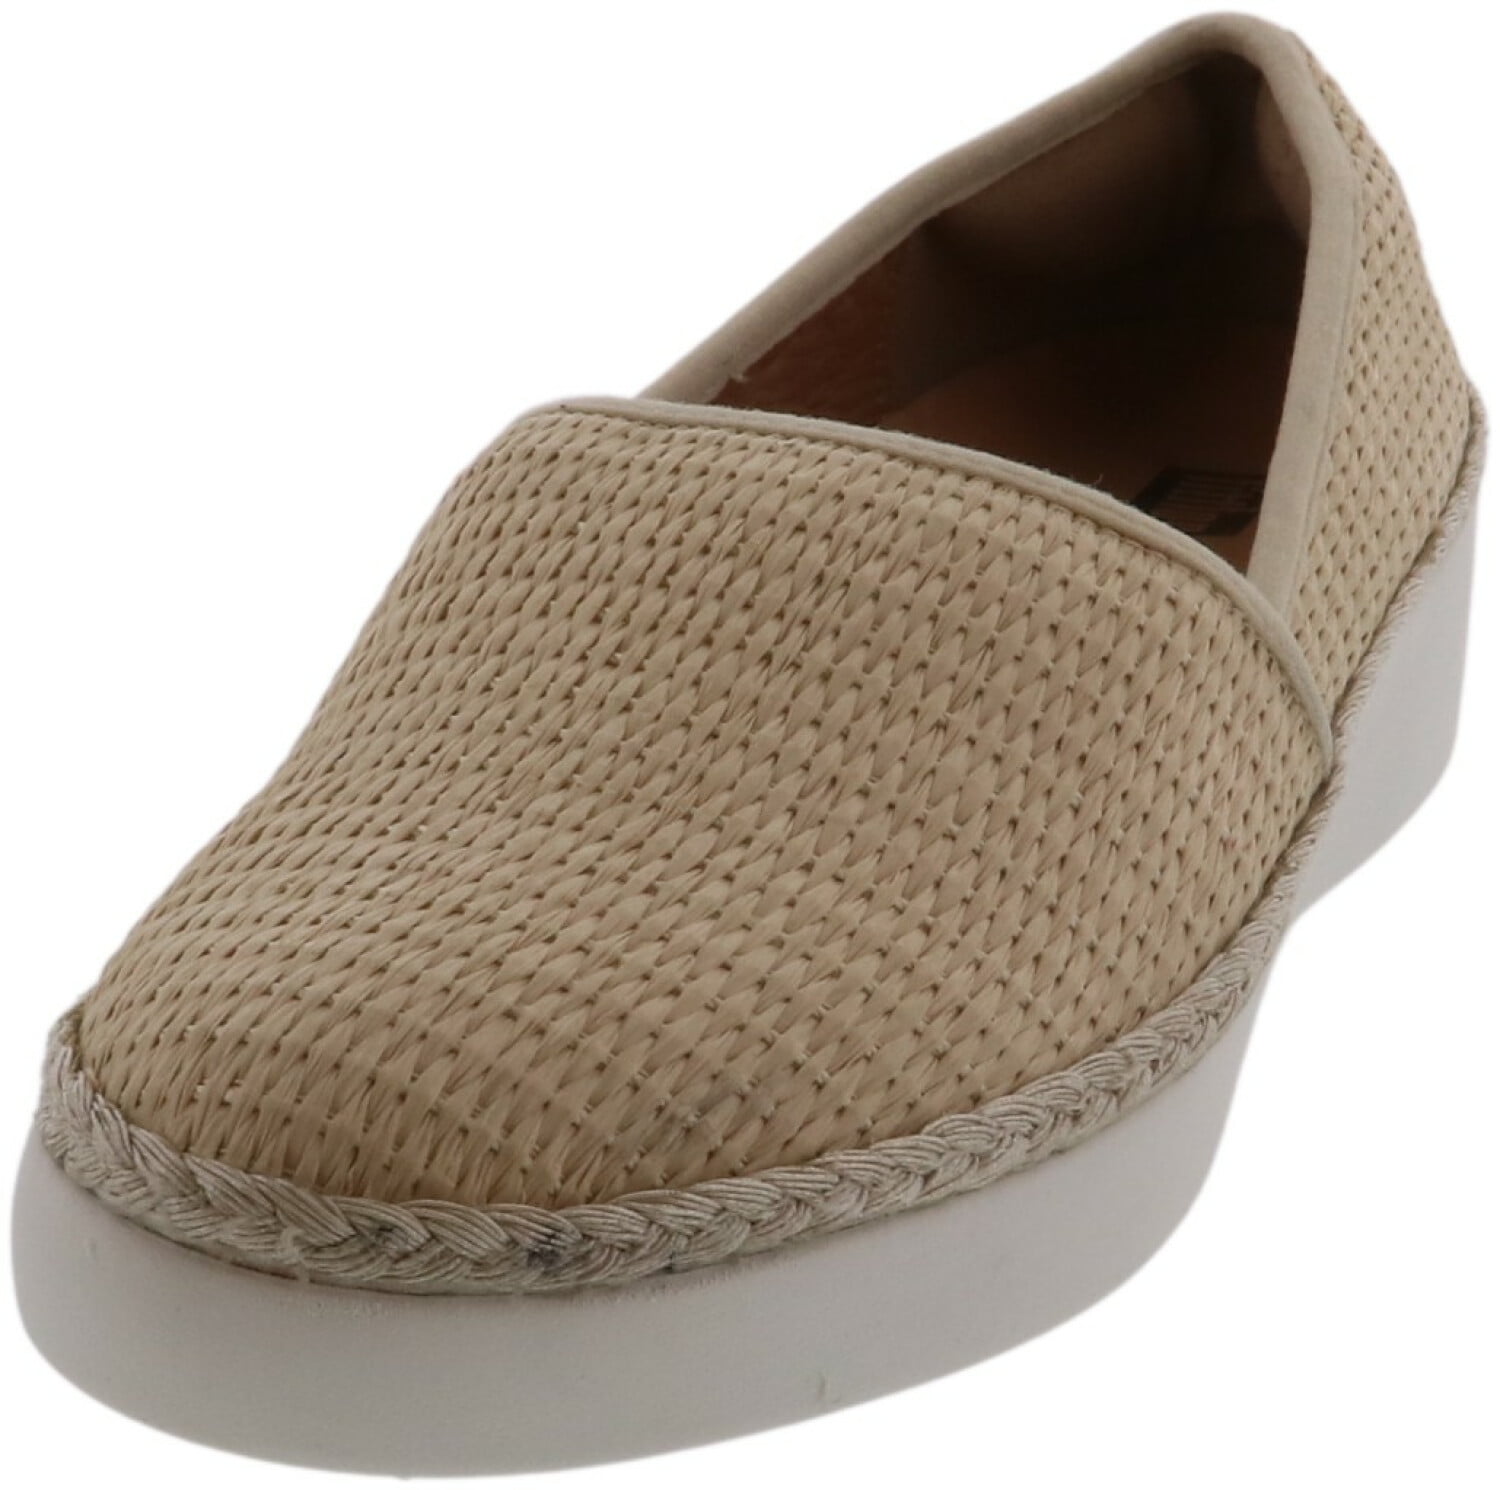 Fitflop Women's Casa Espadrille Loafers Stone Fabric Slip-On Shoes - 8 ...